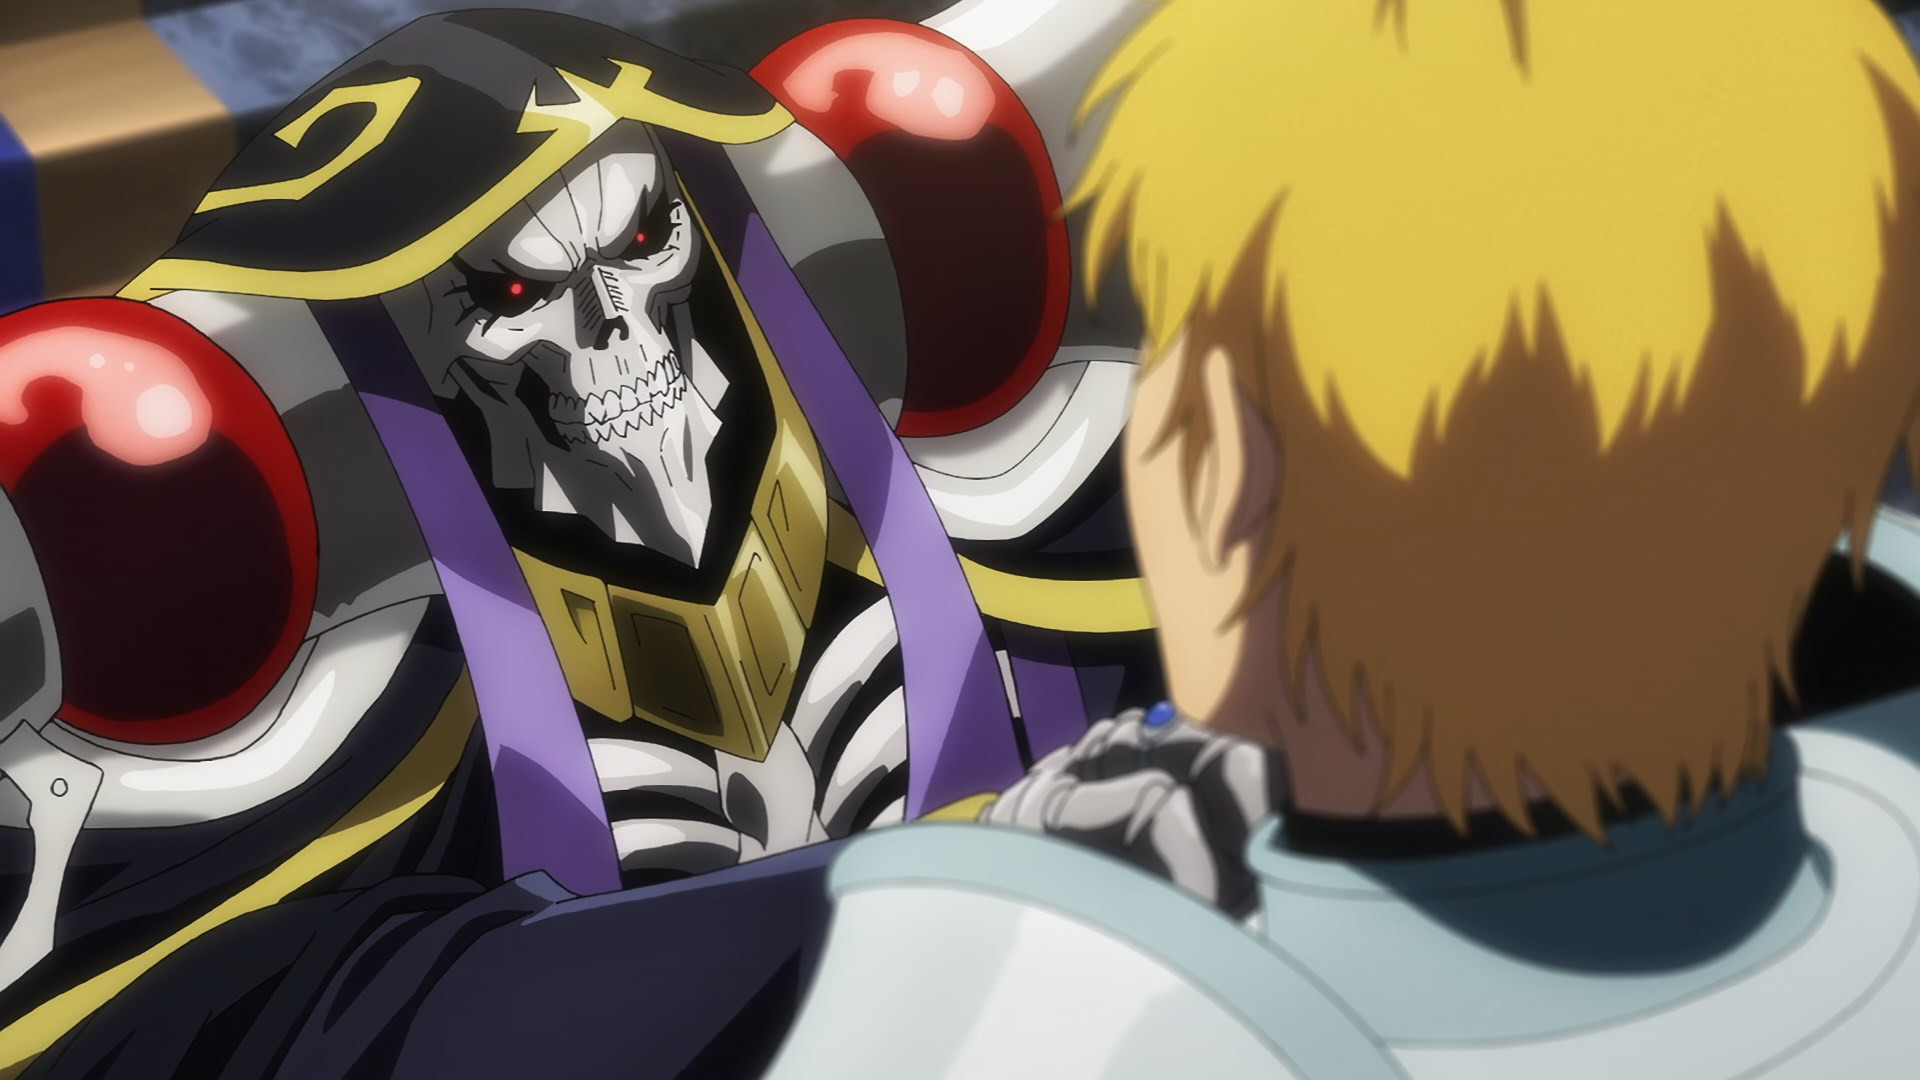 Overlord IV Unveils Preview for Episode 6 - Anime Corner